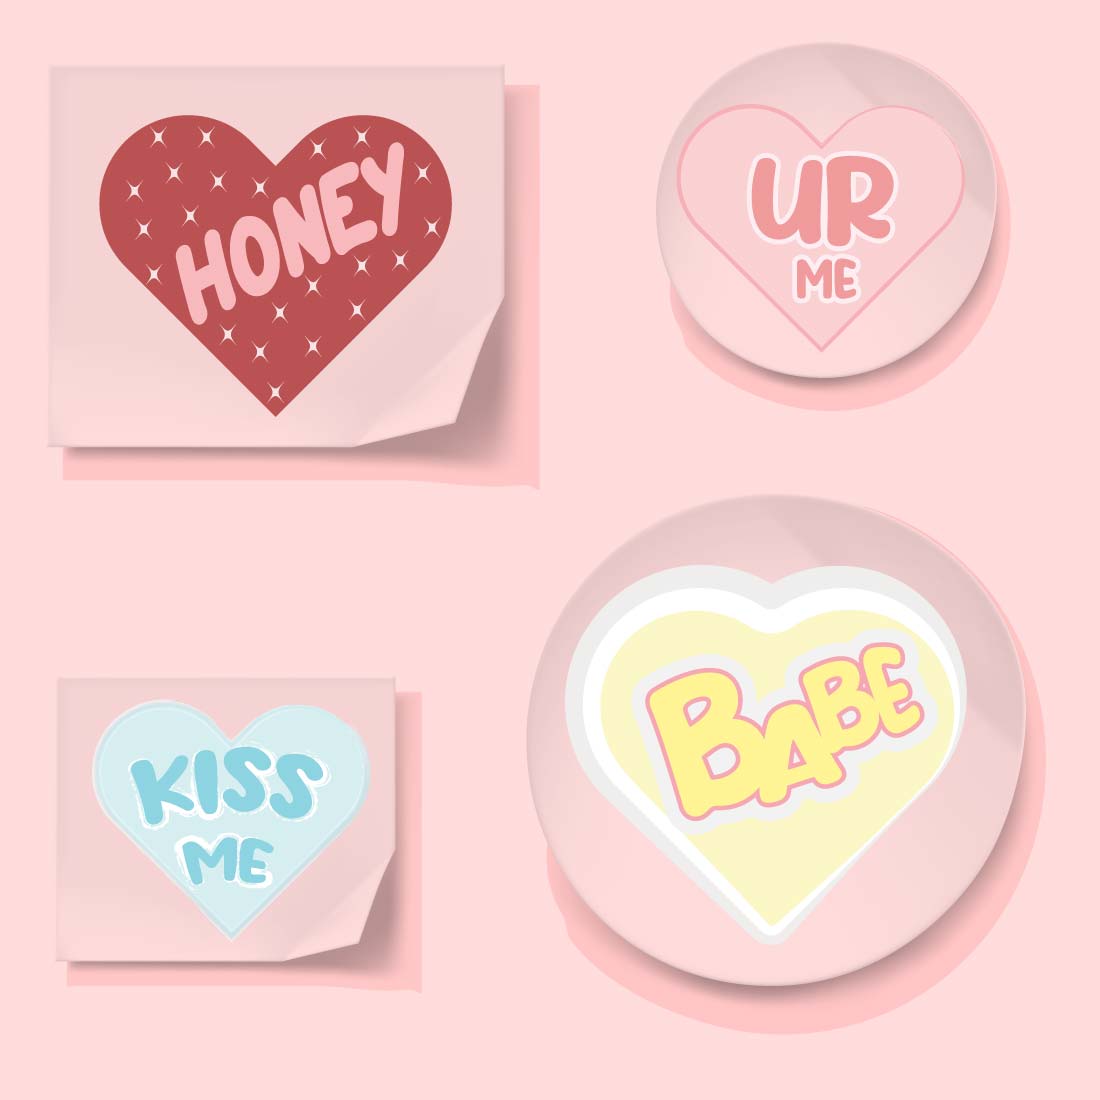 lovely conversation vector hearts collection 01 787